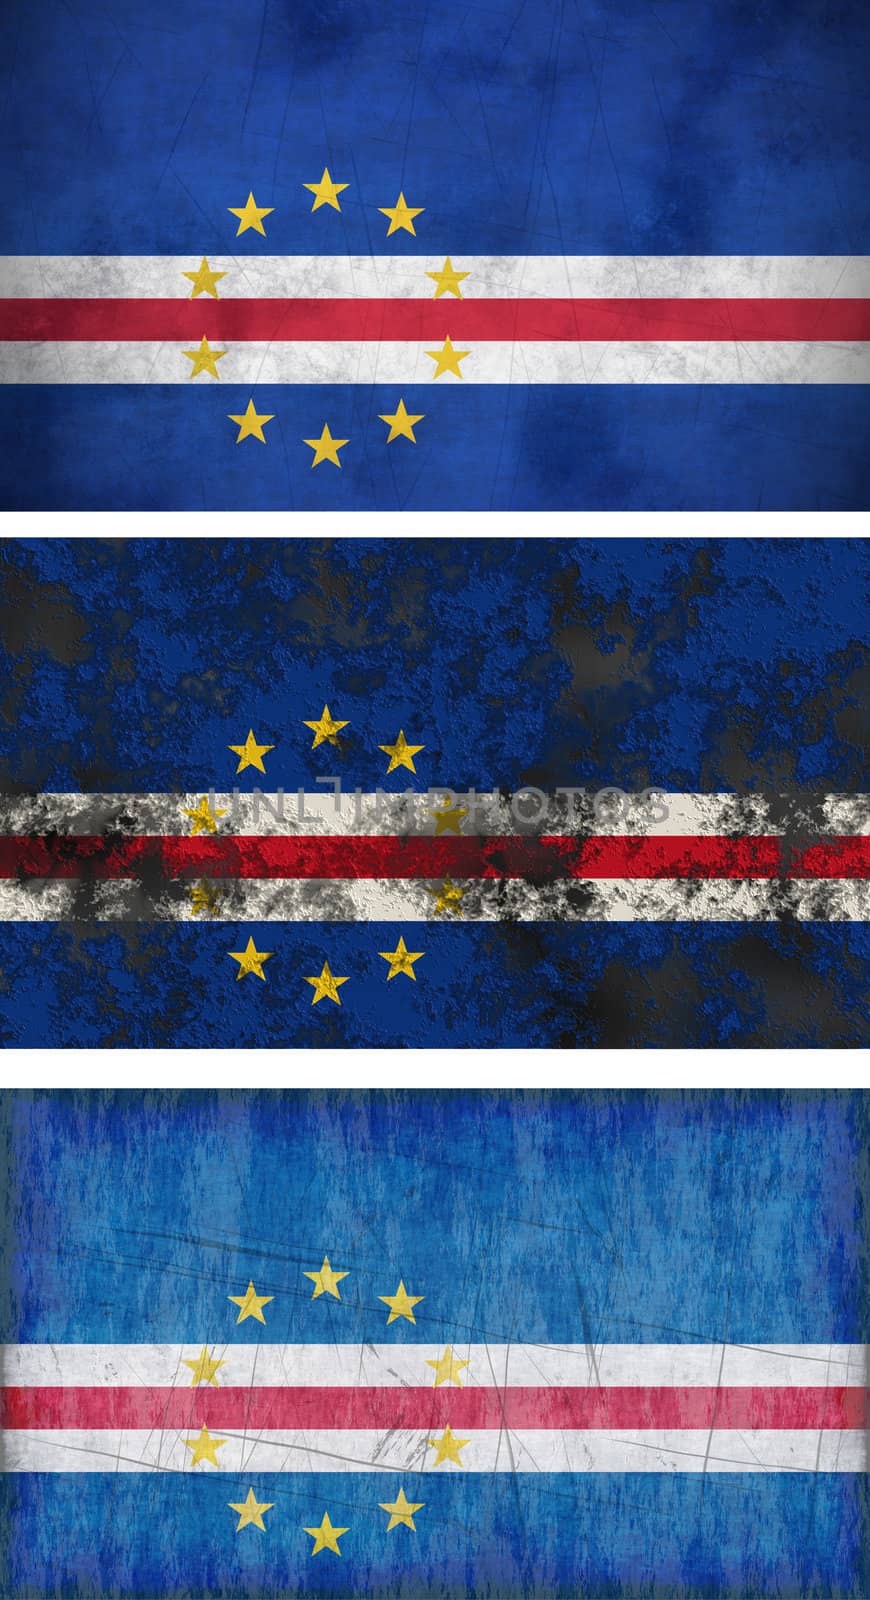 Great Image of the Flag of Cape Verde